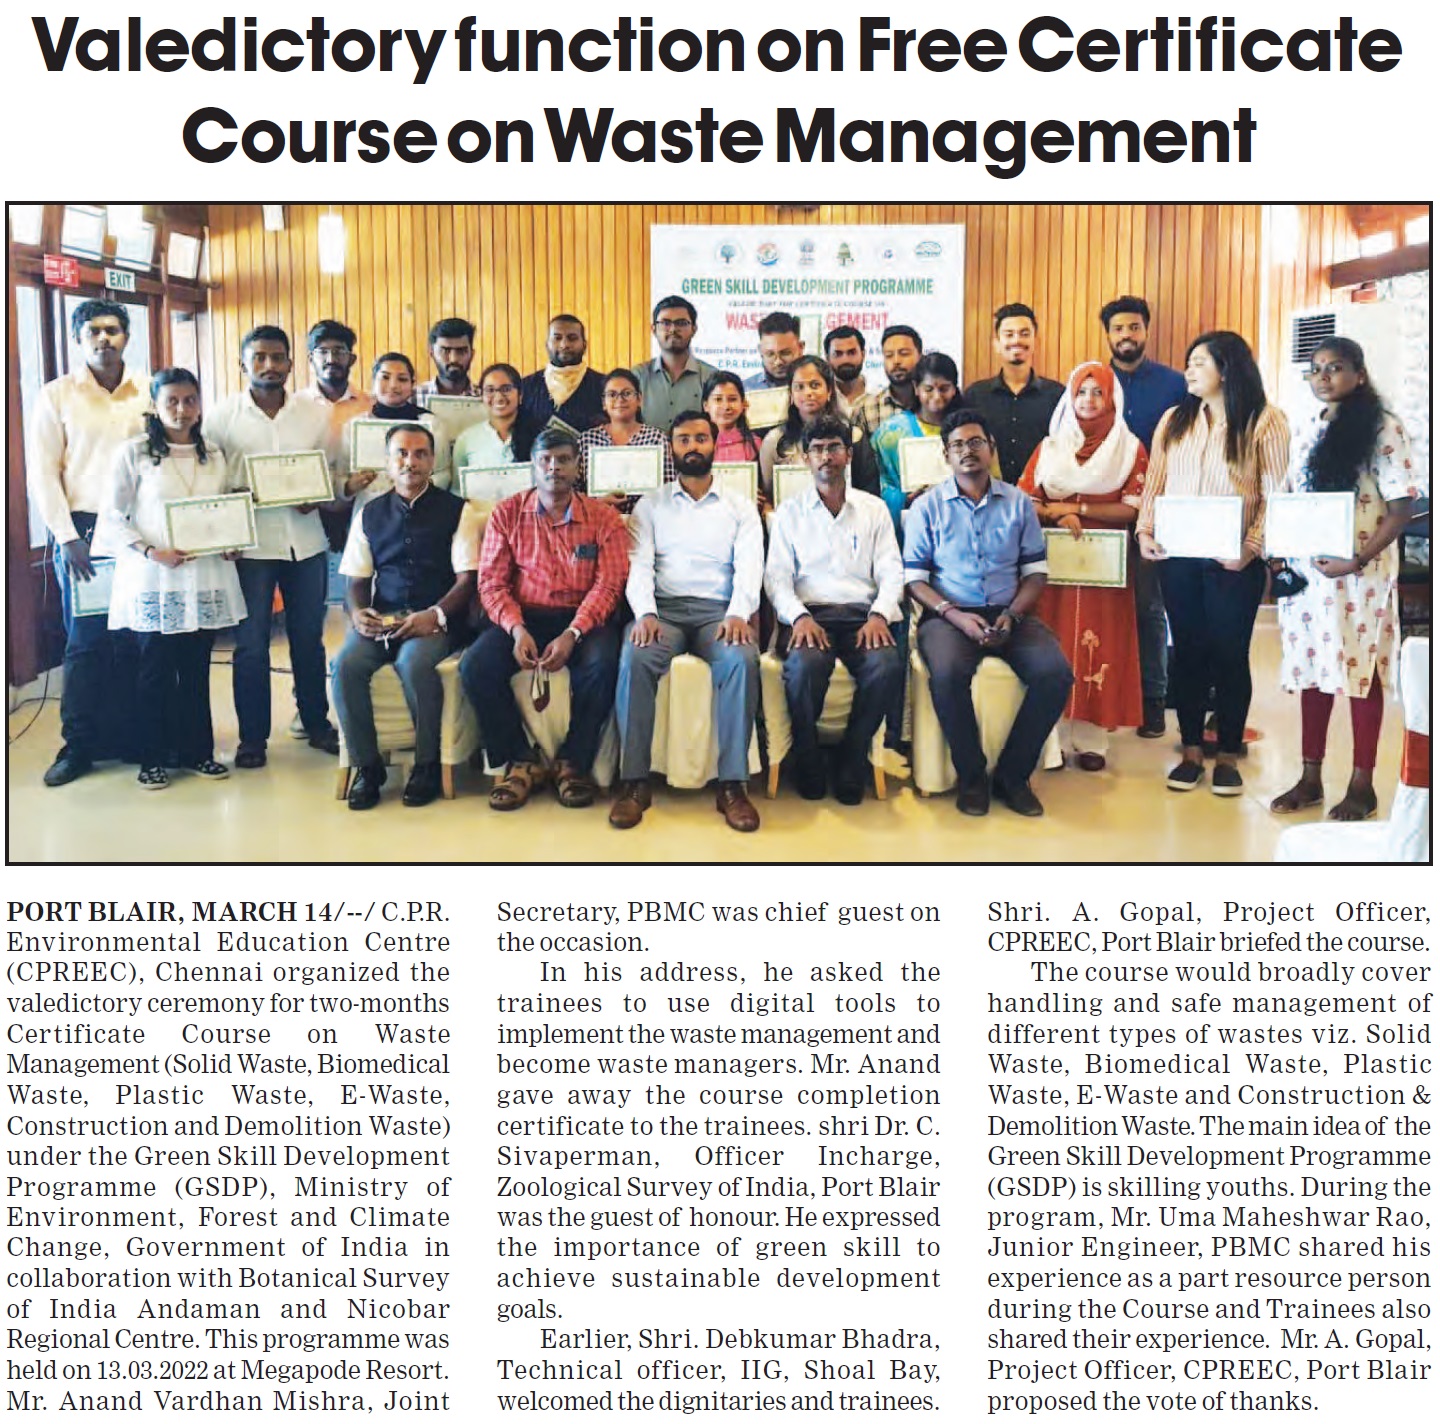 Press clipping of Valedictory Function